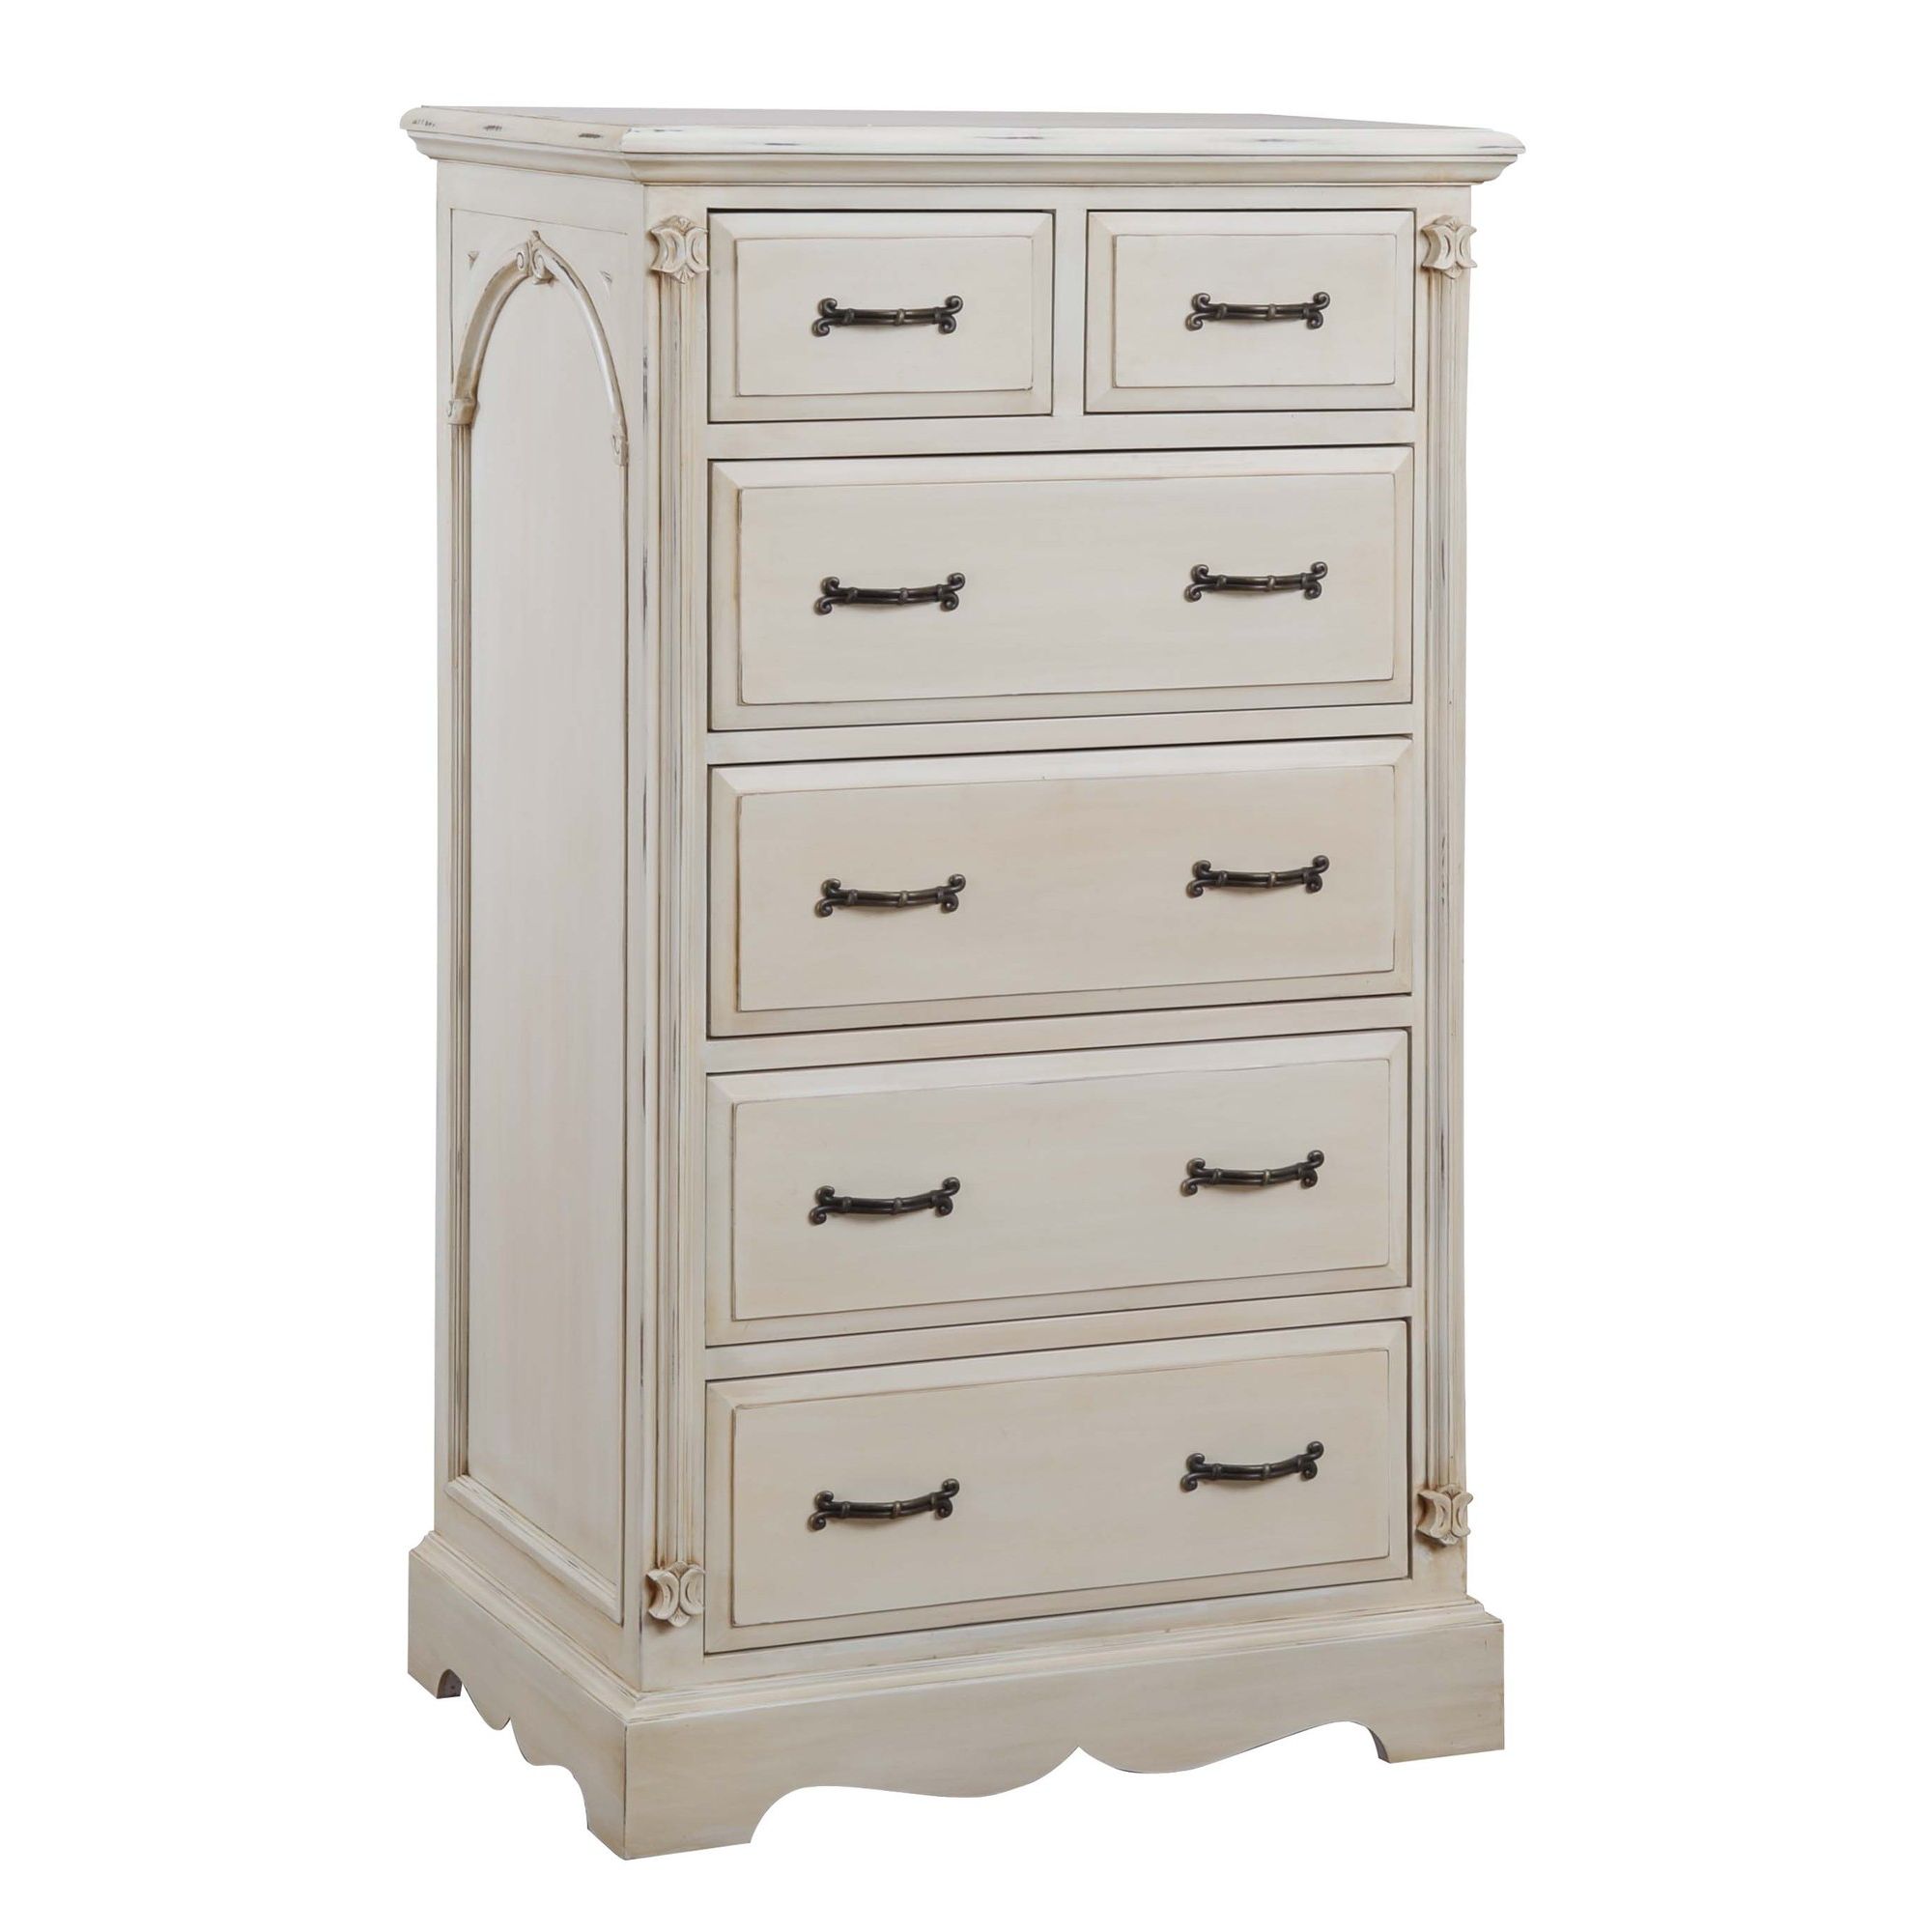 Thorndon Beverley Bedroom Six Drawer Chest in Distressed Ivory at Tesco Direct